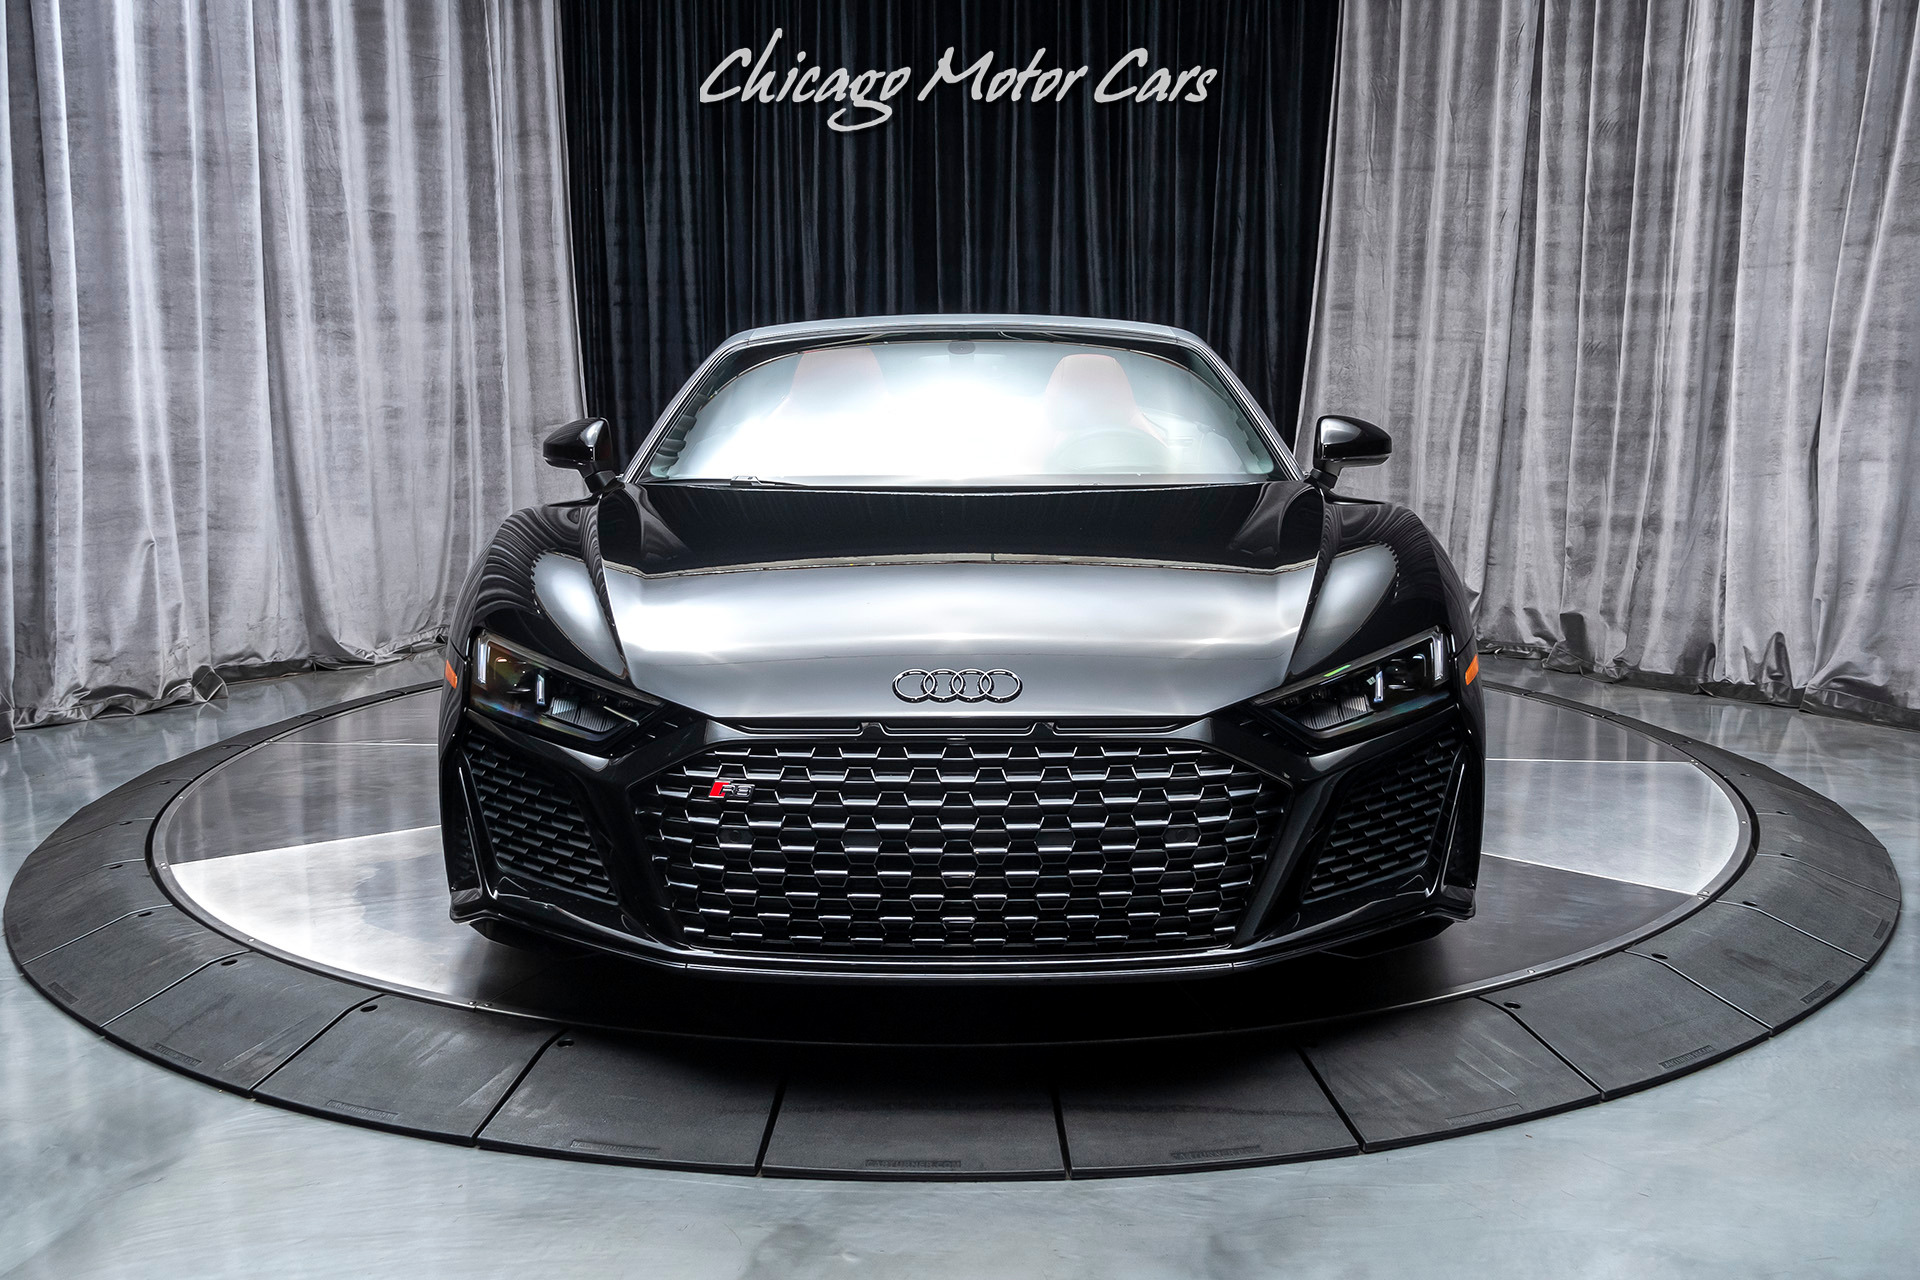 Used-2020-Audi-R8-52L-V10-Quattro-Spyder-Convertible-MSRP-203k-ONLY-2700-MILES